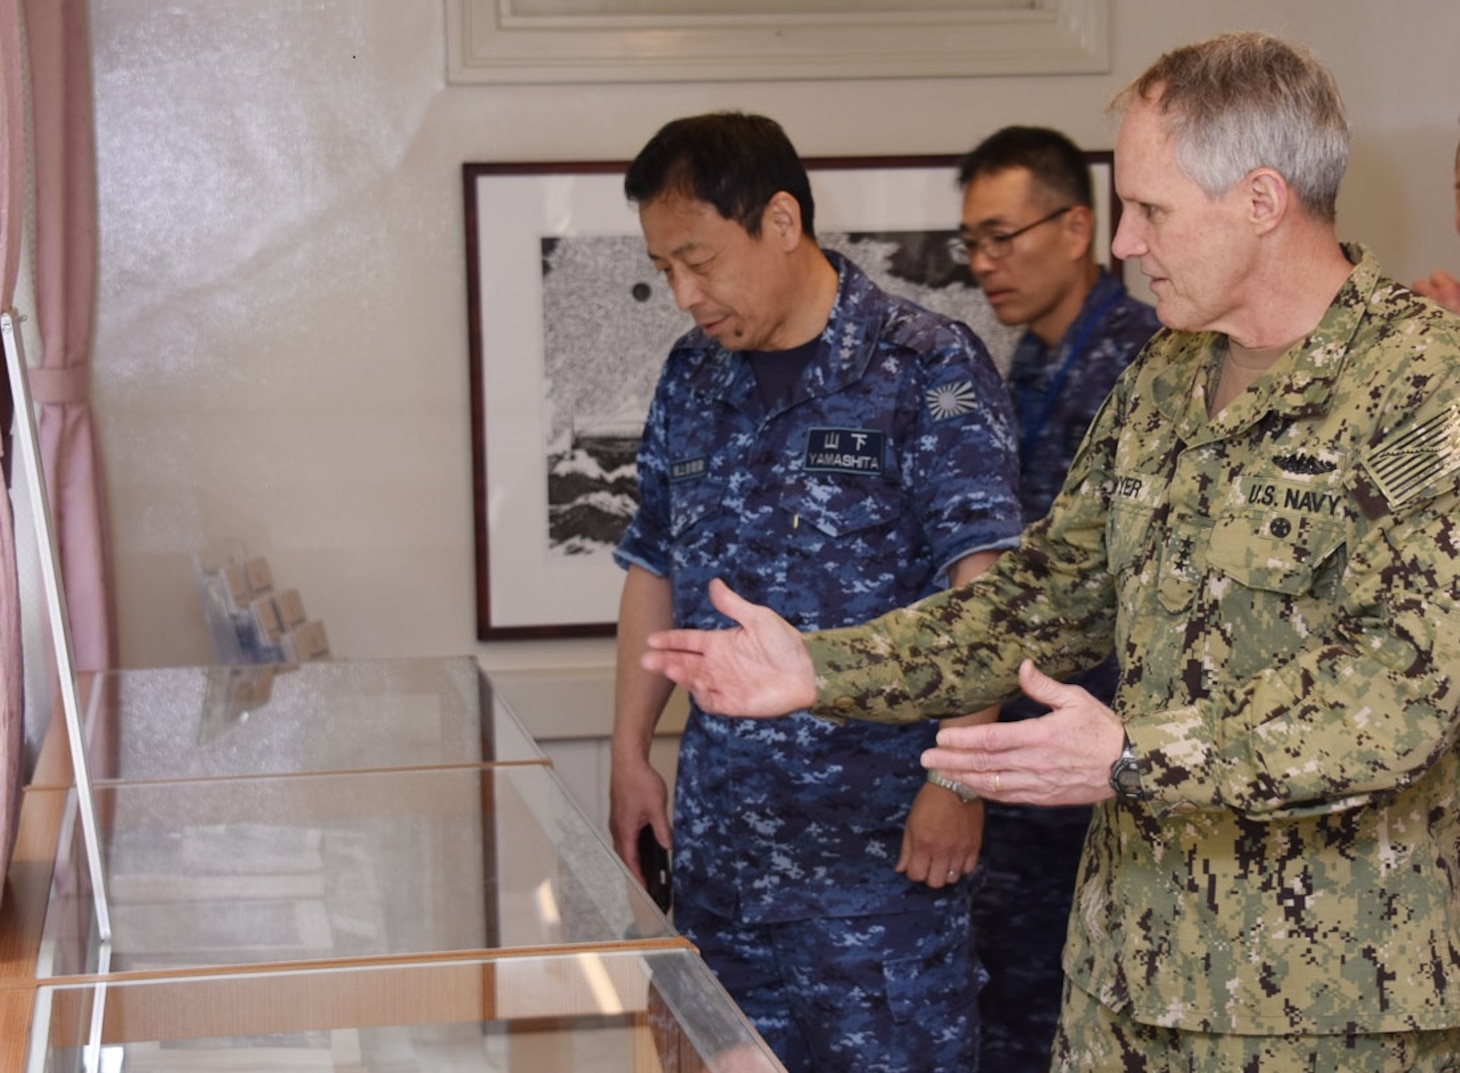 KYOTO, Japan (April 10, 2018) Vice. Adm. Phil Sawyer, commander, U.S. 7th Fleet, forefront, visits Togo-tei, the official residence of former Japanese Imperial Navy admiral Togo Heihachiro as a guest of Japan Maritime Self-Defense Force (JMSDF) Vice Adm. Kazuki Yamashita left, commandant of the JMSDF Yokosuka District and Vice Adm. Takehisa Nakao, commandant of the Maizuru District. Sawyer visited the Maizuru district headquarters in Kyoto to reinforce 7th Fleet’s close, long-standing partnership with the JMSDF throughout Japan.